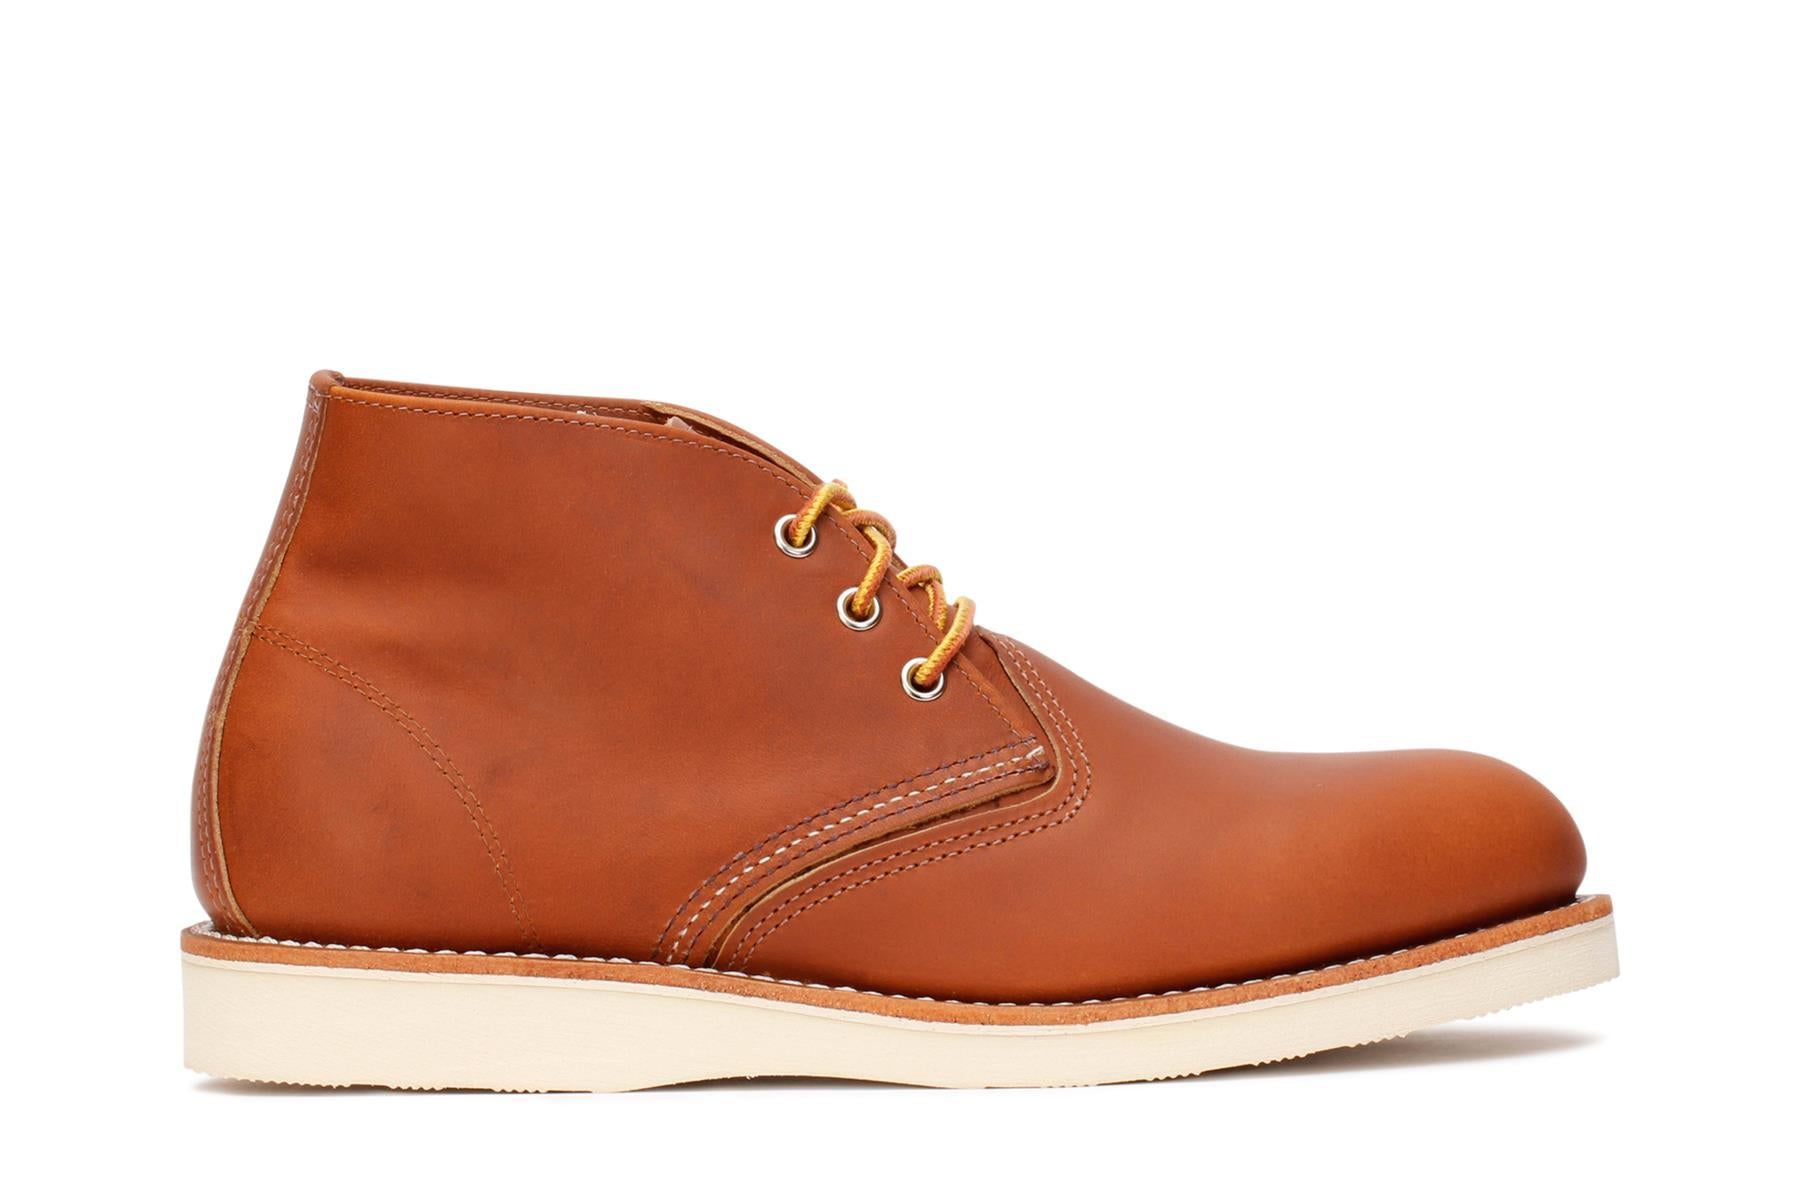 red-wing-shoes-heritage-mens-work-chukka-boots-oro-iginal-leather-3140-main